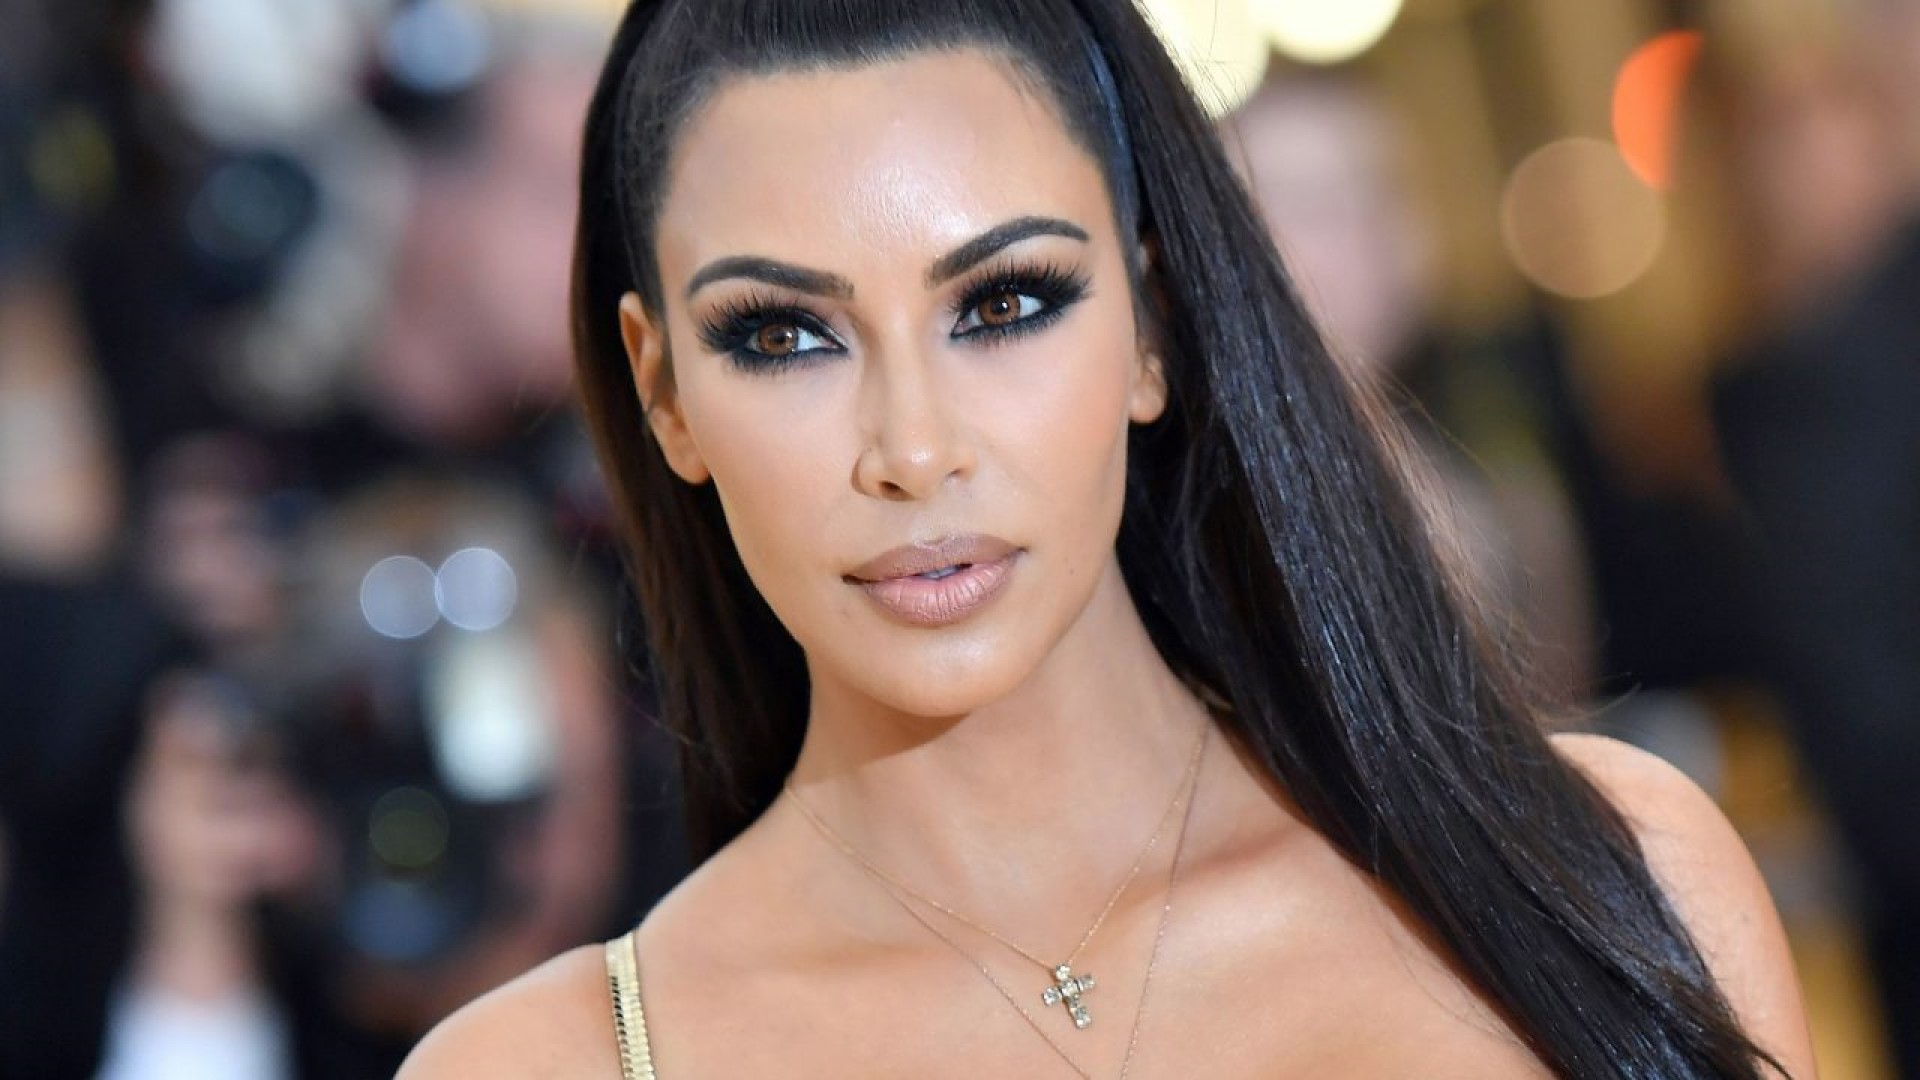 <p>There’s also a mobile game about the TV star, called ‘Kim Kardashian: Hollywood.’ It was released in 2017 and has been downloaded more than 60 million times.</p>